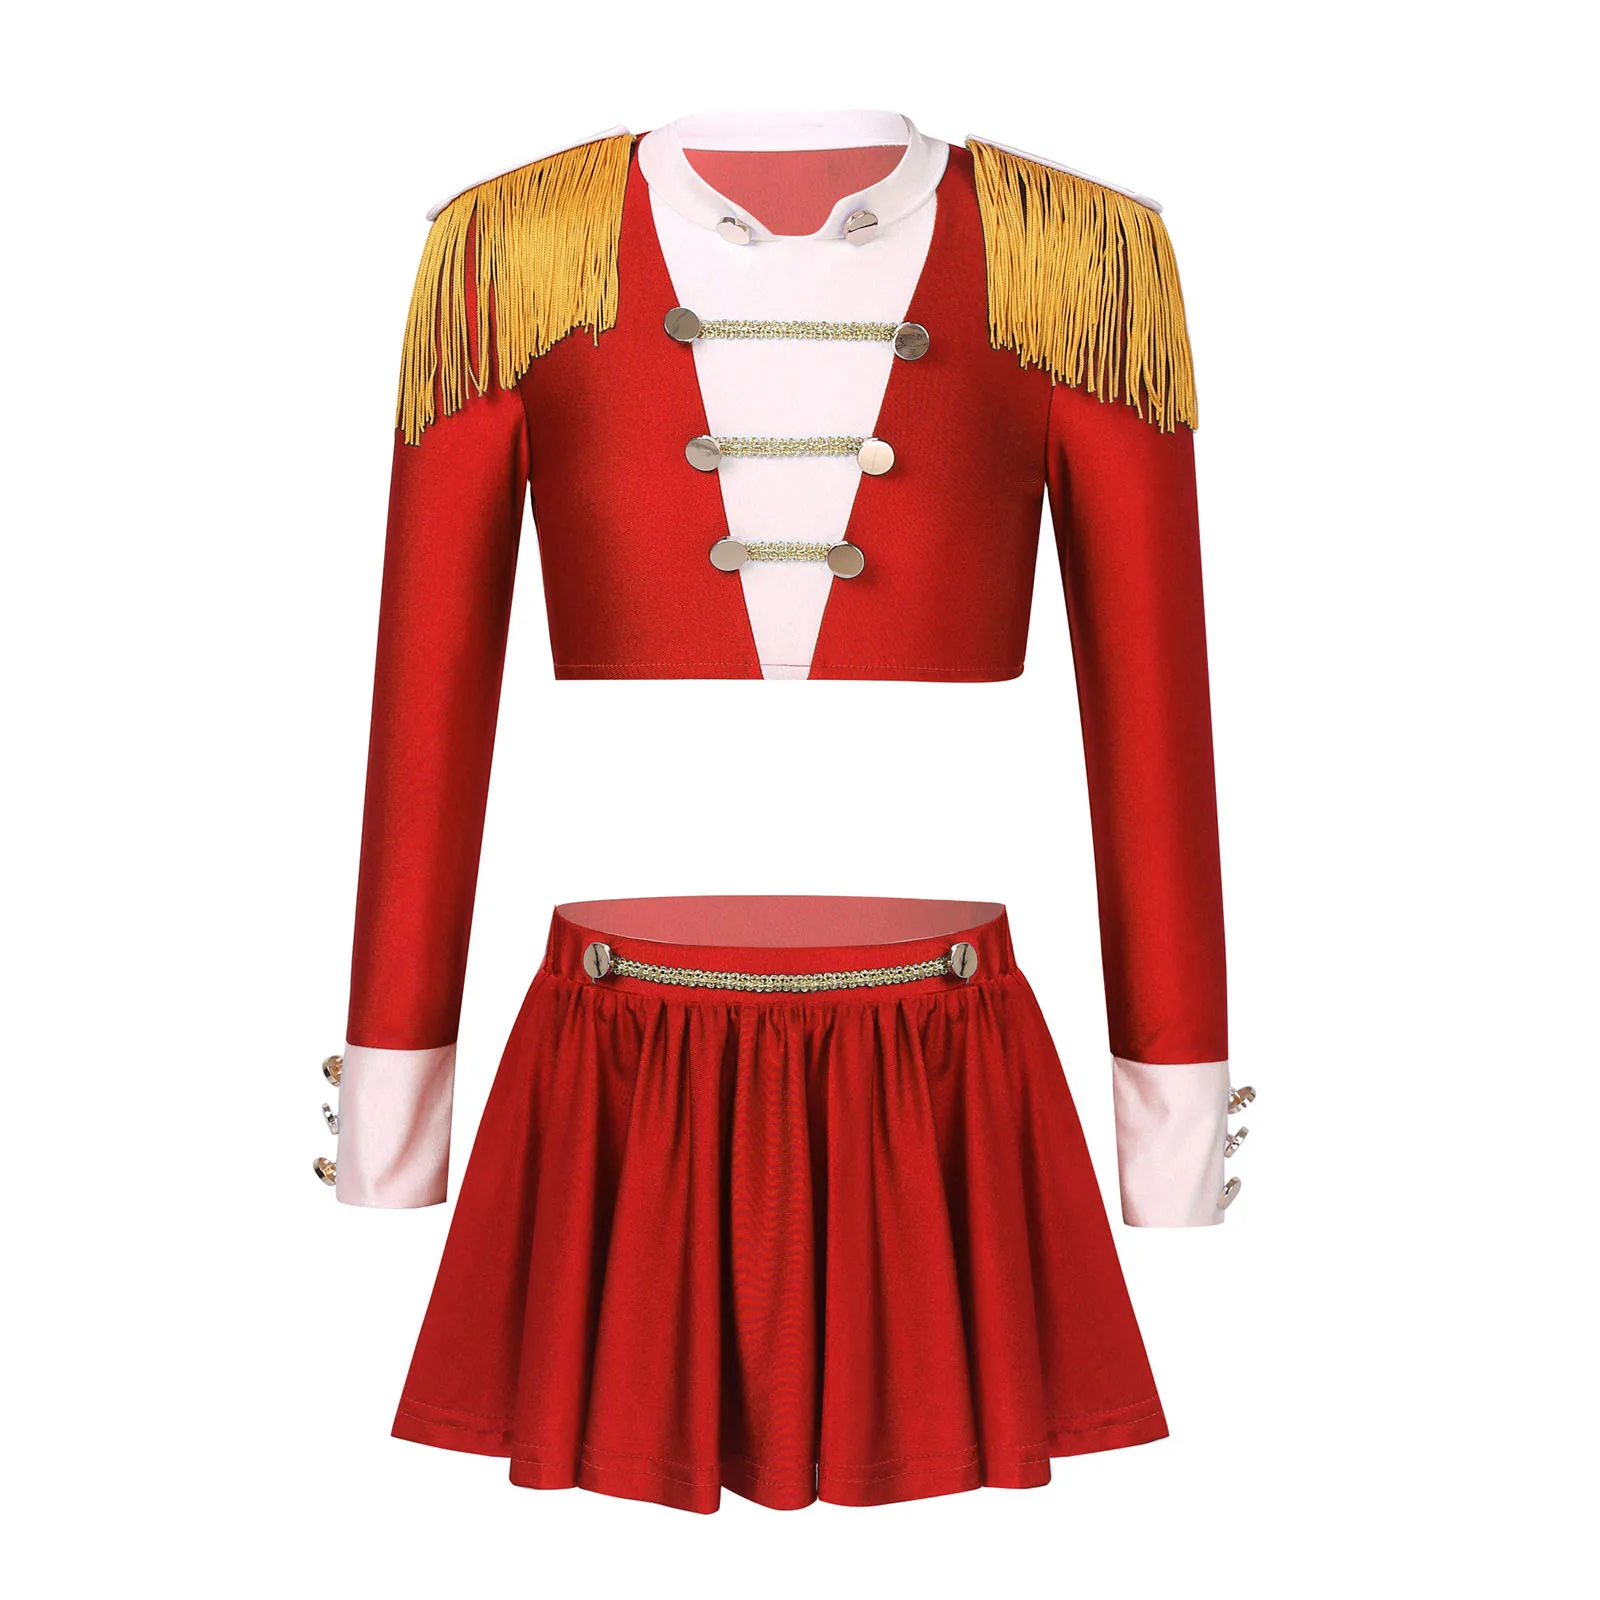 

New Professional Kids Girls Dance Level Examination Costume Latin Jazz Dancewear Long Sleeves Crop Top and Skirt 2Pcs Outfits